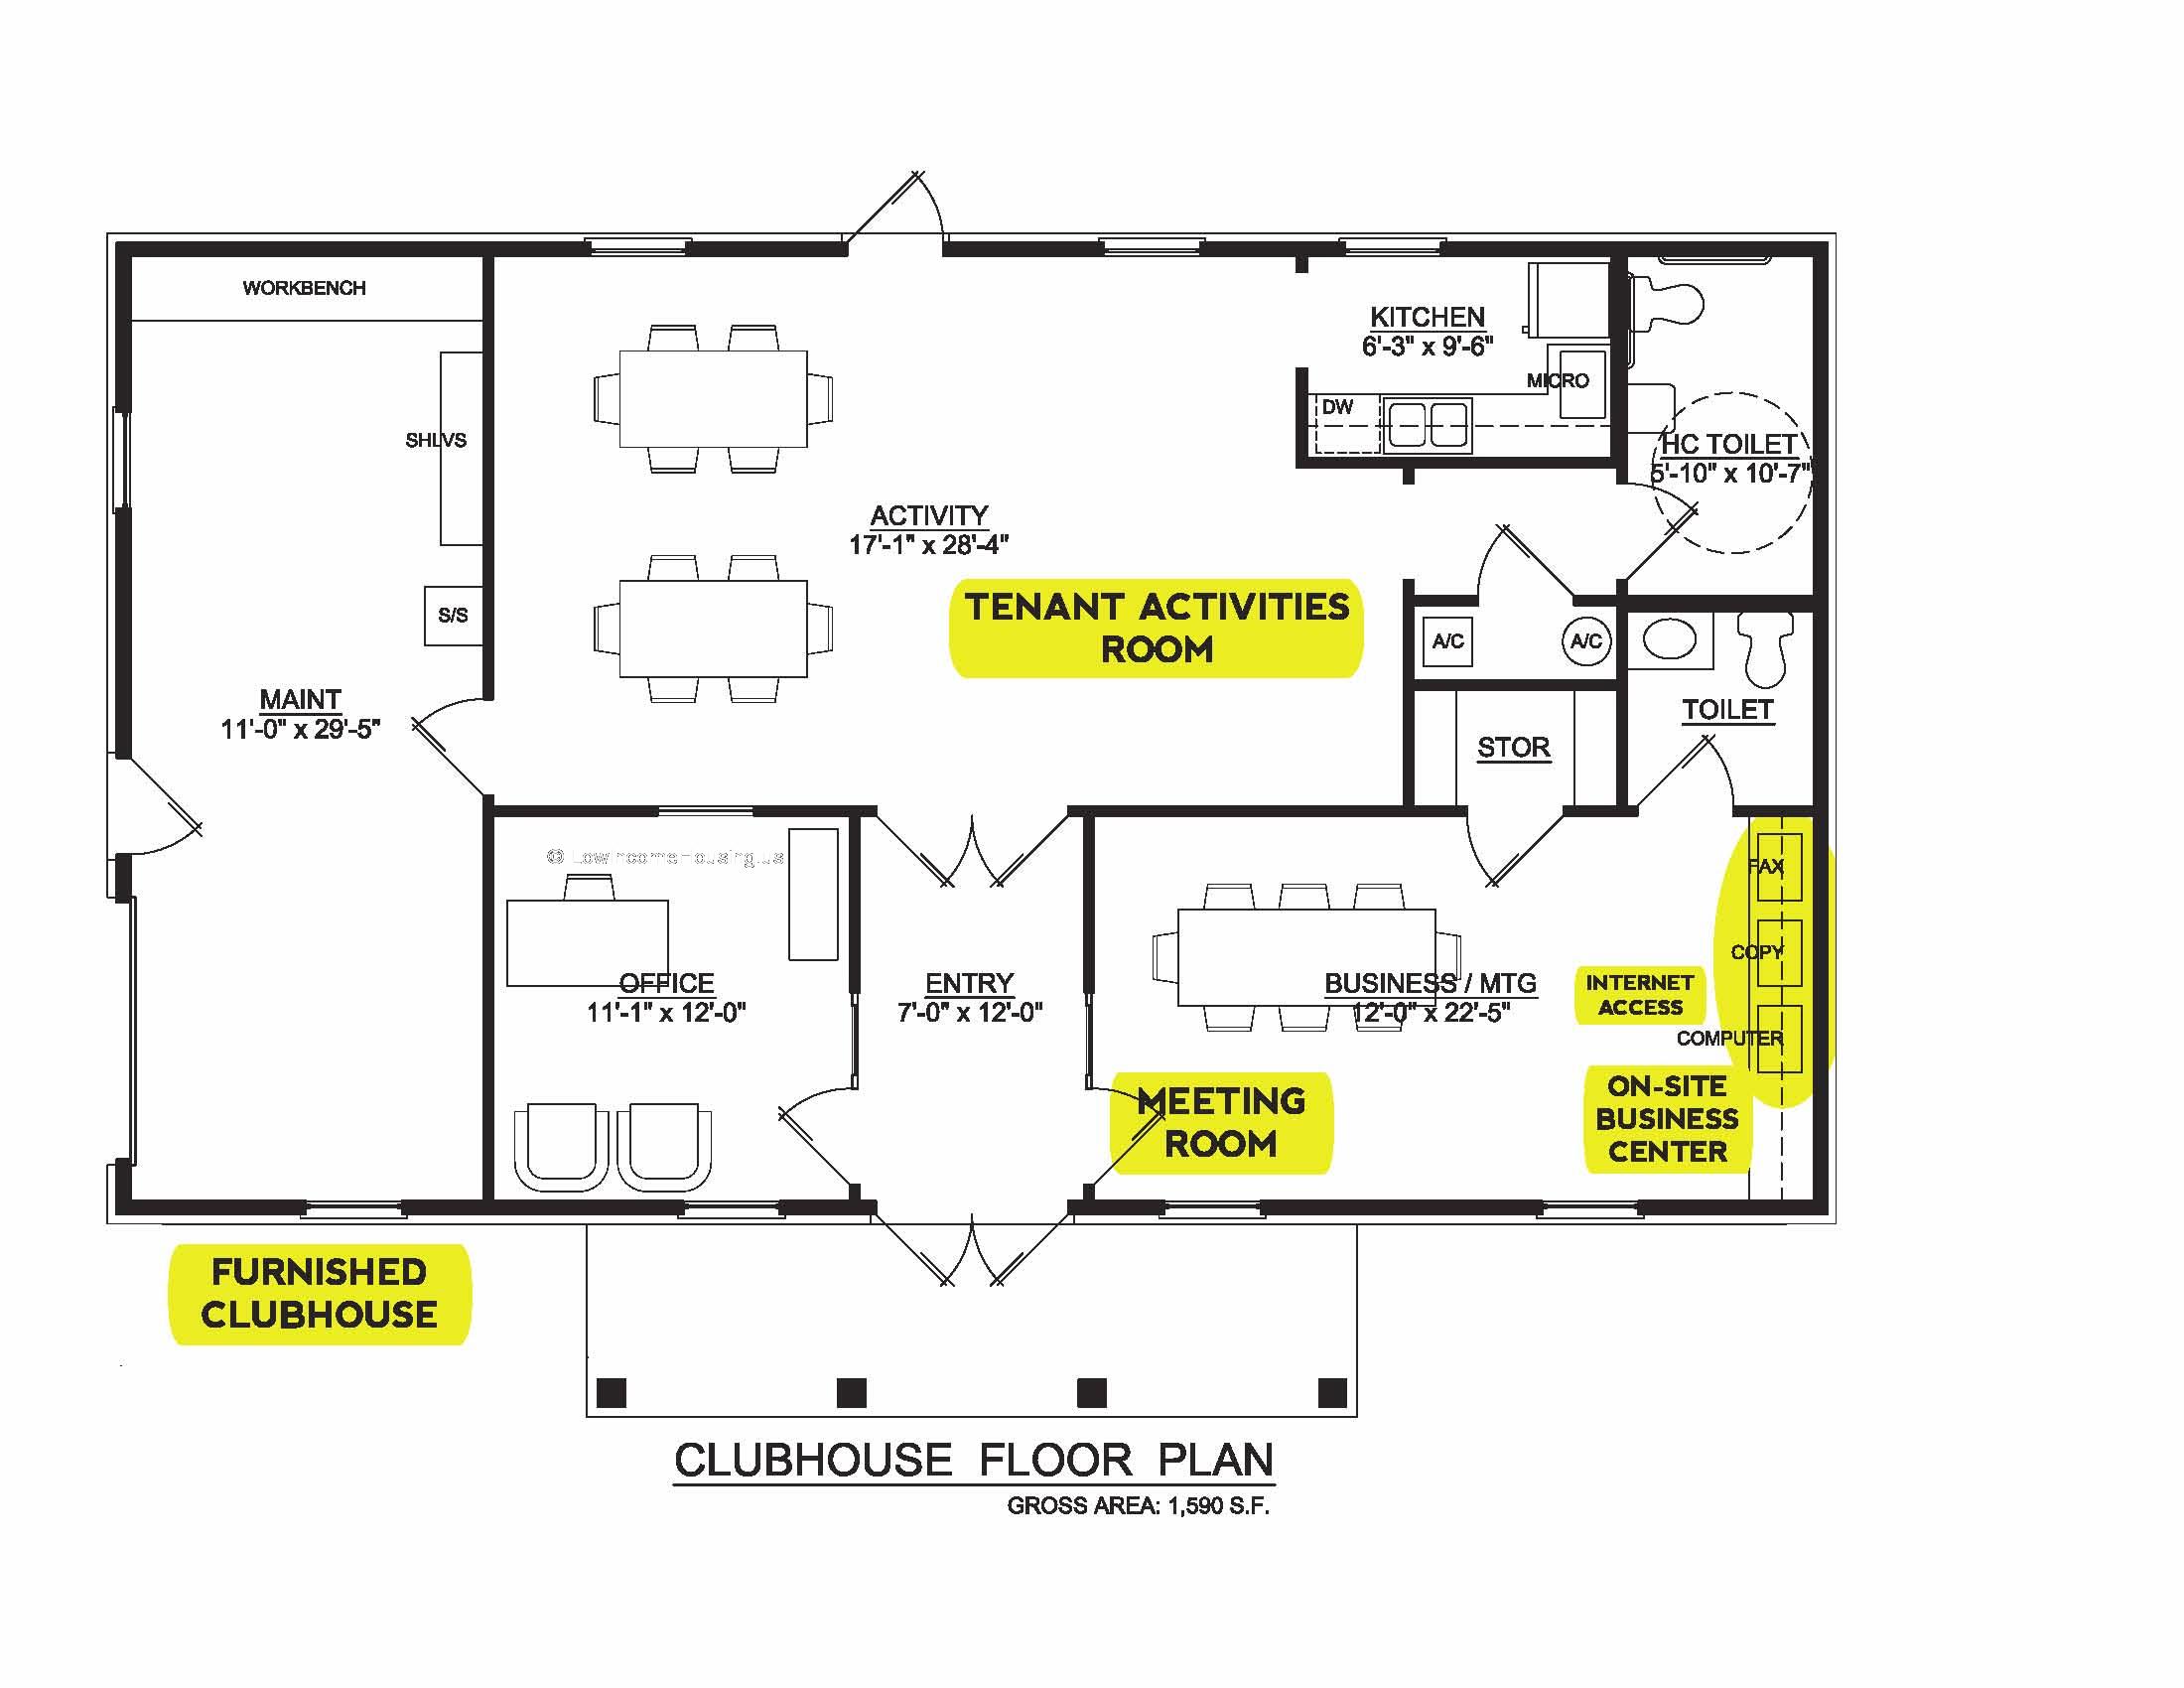 Clubhouse Floor Plan with Meeting Room and Business Center (with InterNet Access)